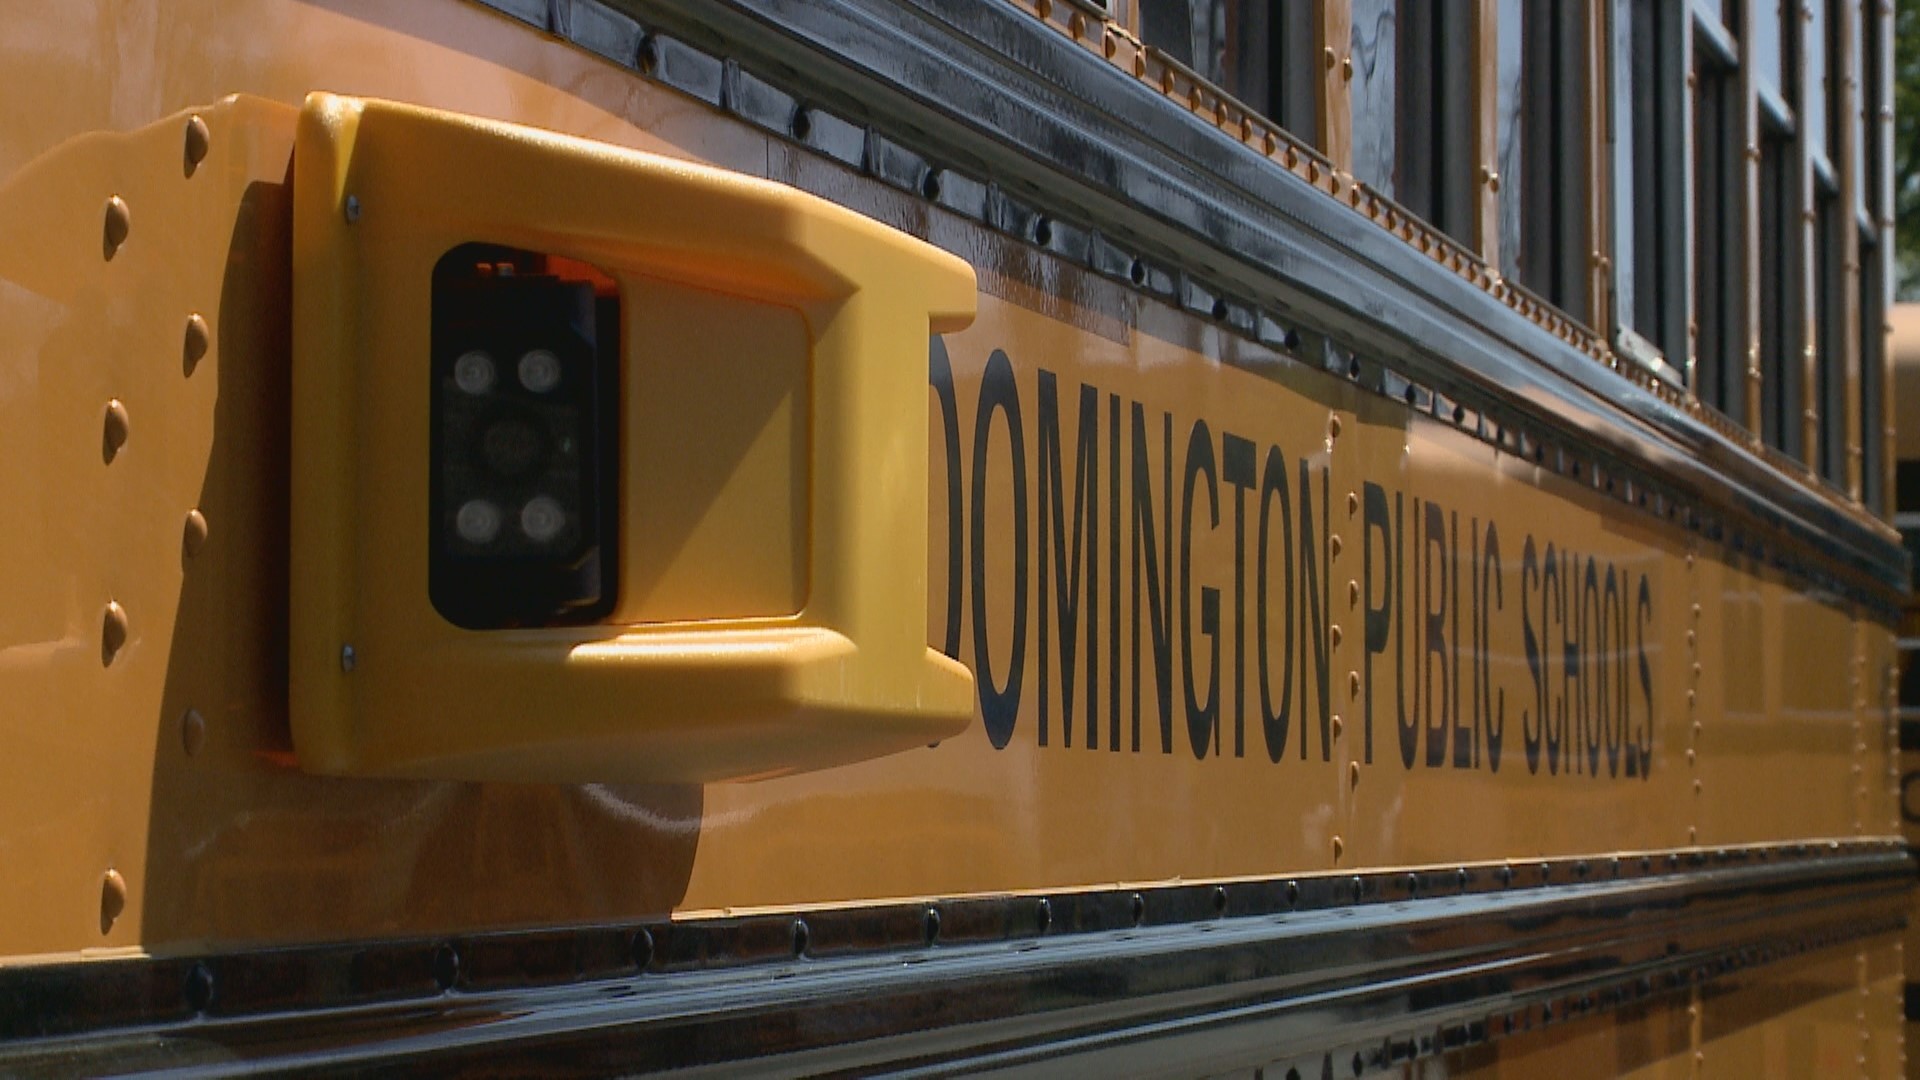 The new law also allows school districts and bus companies to use fines from the violations to maintain the camera systems.